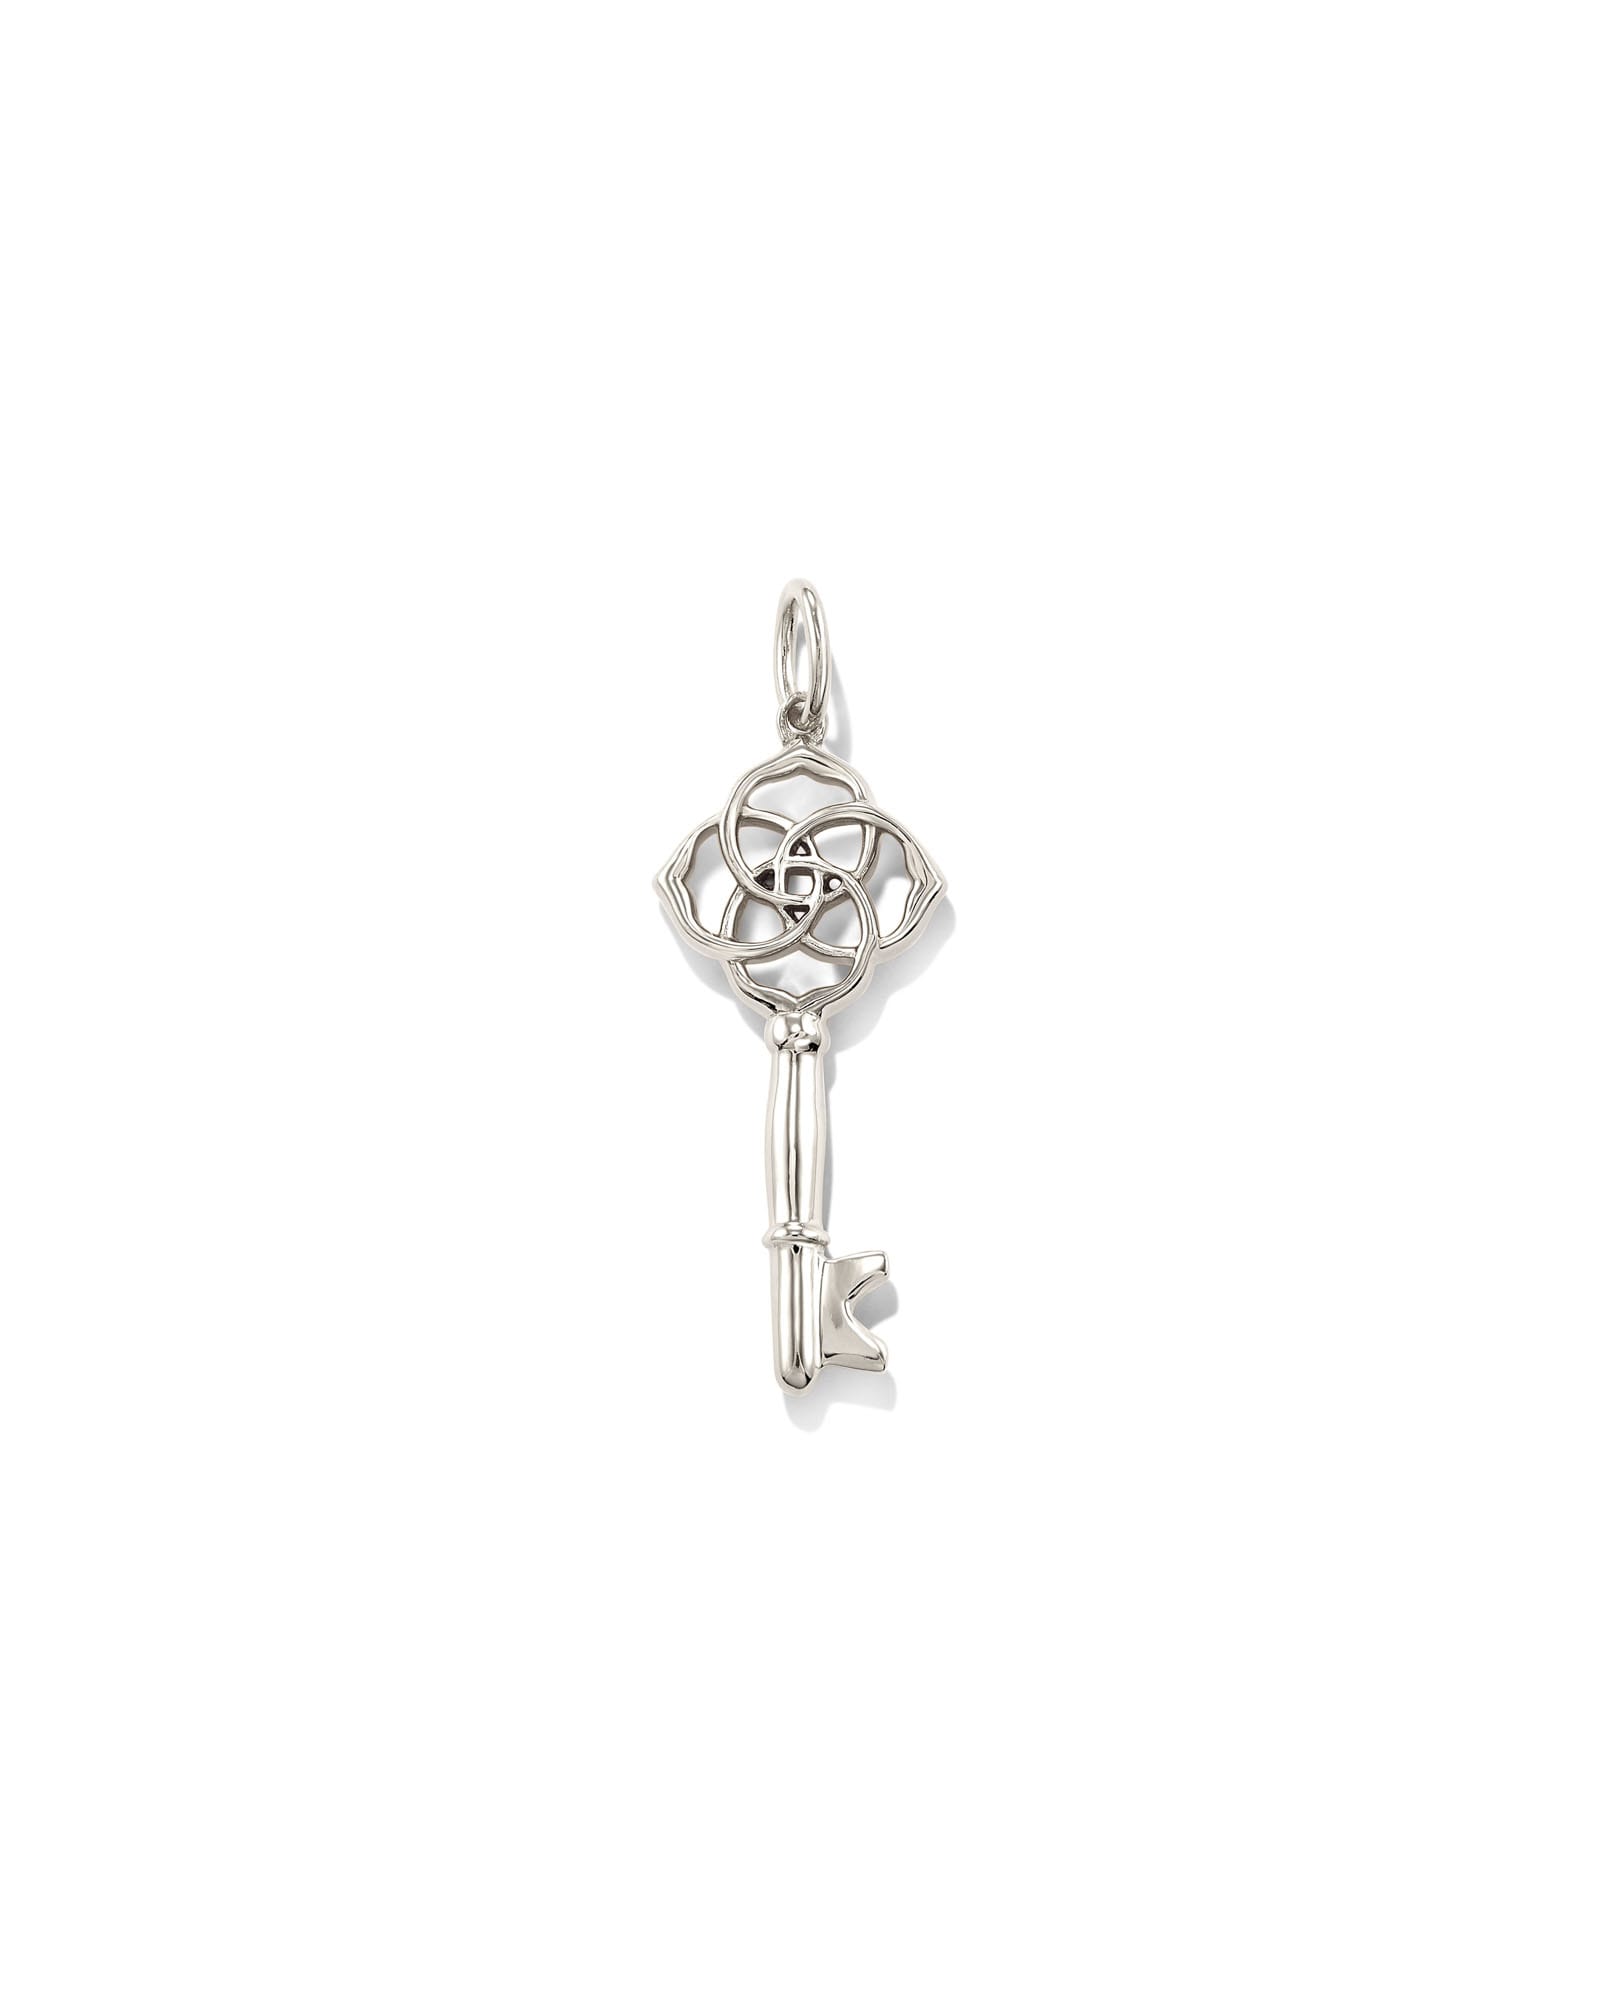 Kendra Scott Home & Shelter Charm in | Sterling Silver